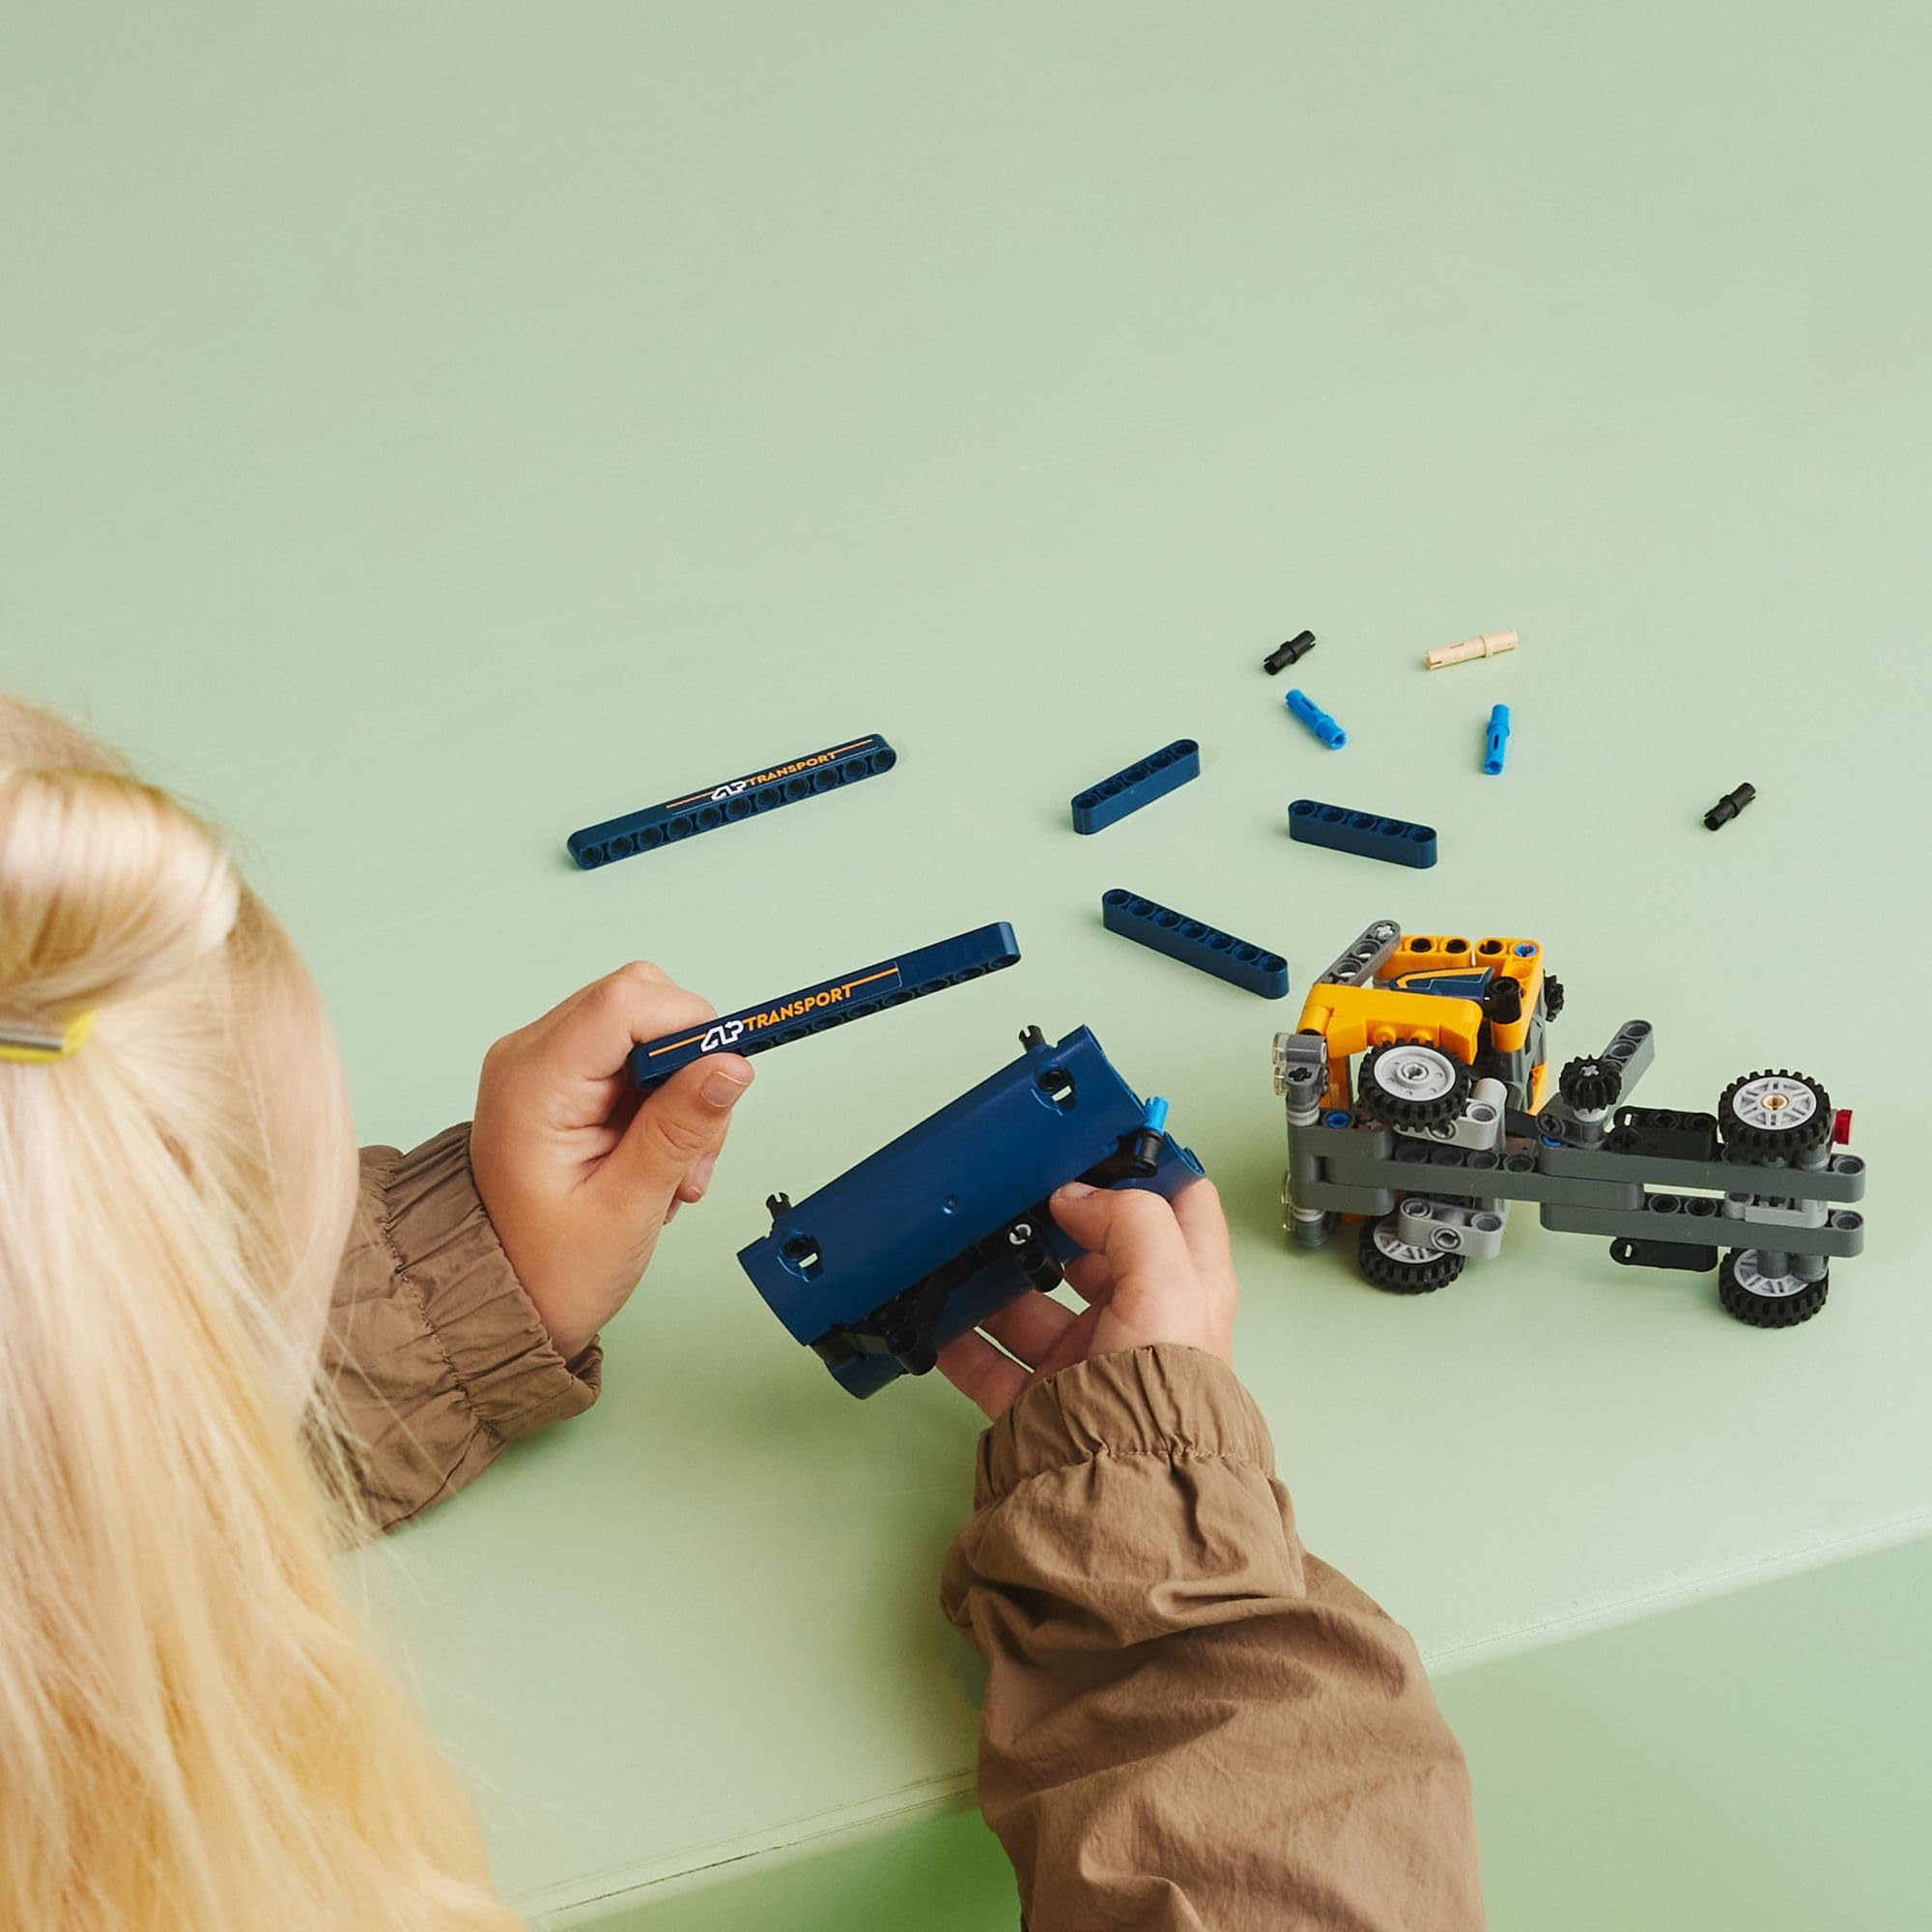 LEGO Technic Dump Truck 2in1 Toy Building Set 42147, Model Construction Vehicle and Excavator Digger Kit, Engineering Building Toys for Back to School, Gift for Kids, Boys, Girls Ages 7+ Years Old